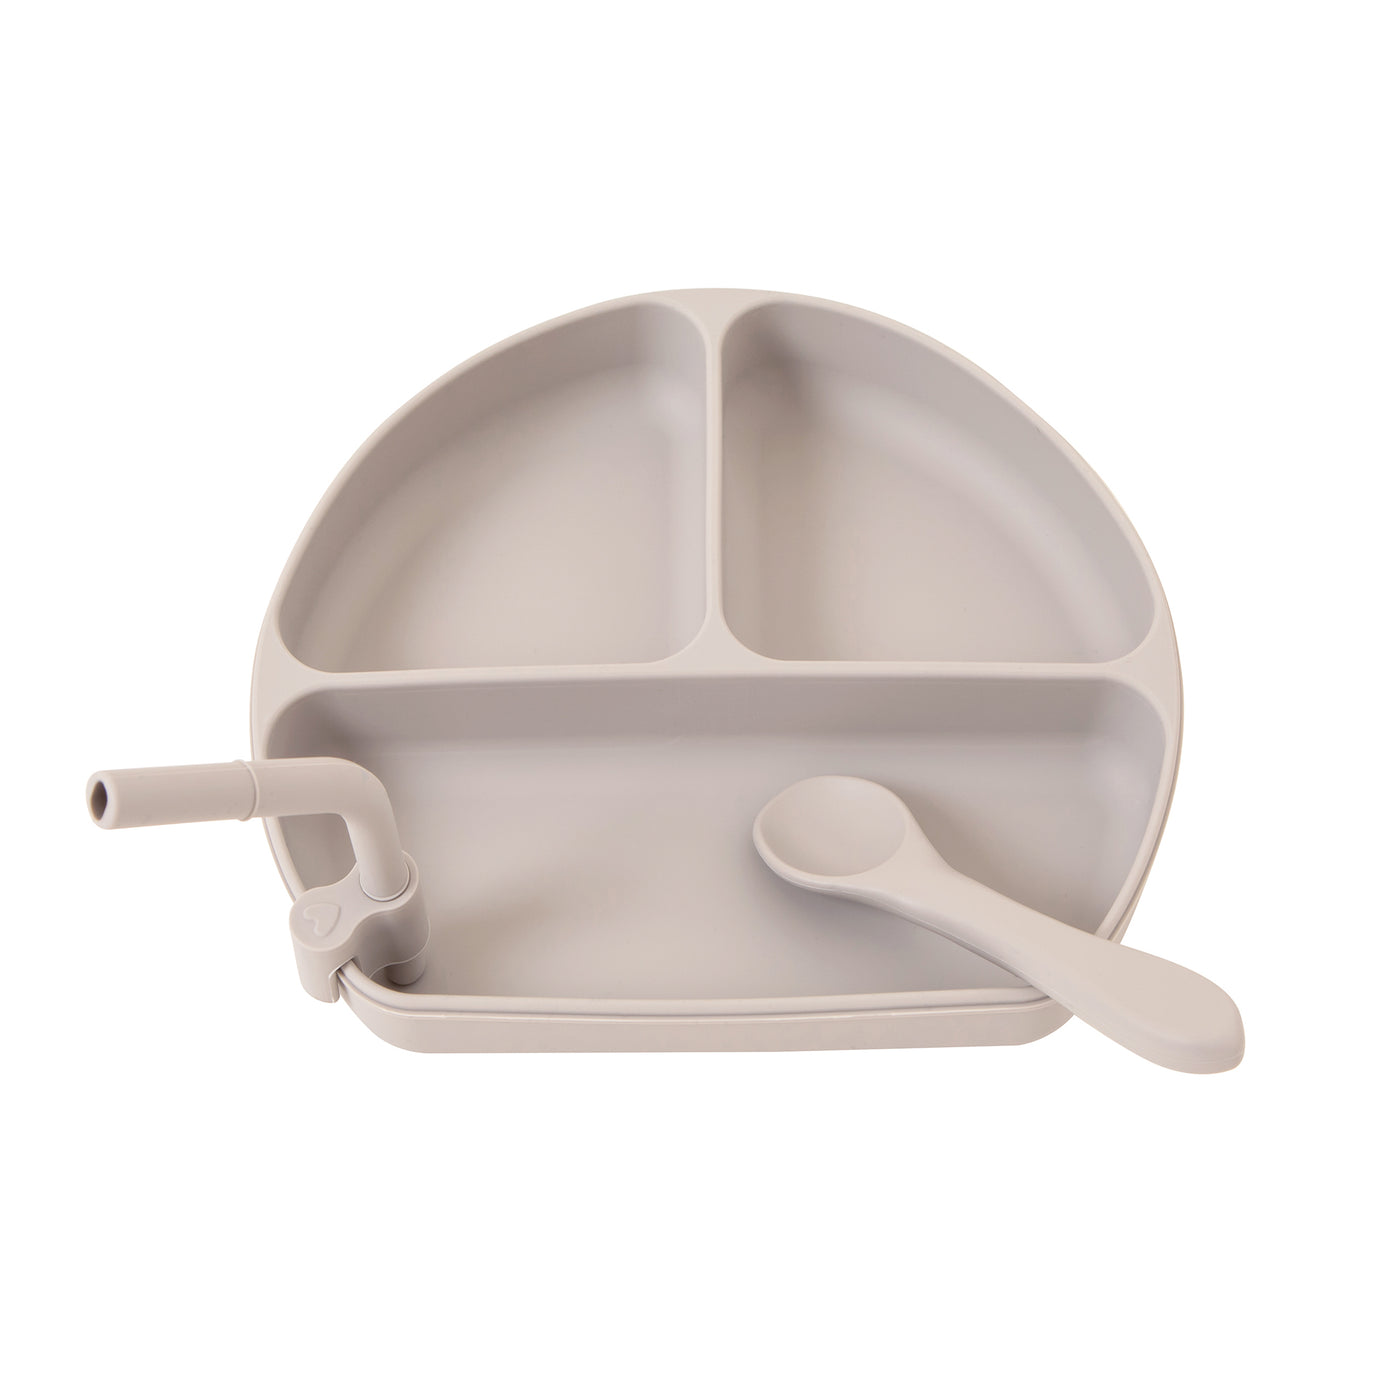 Silicone Baby Plate w/divider and suction base - Sage